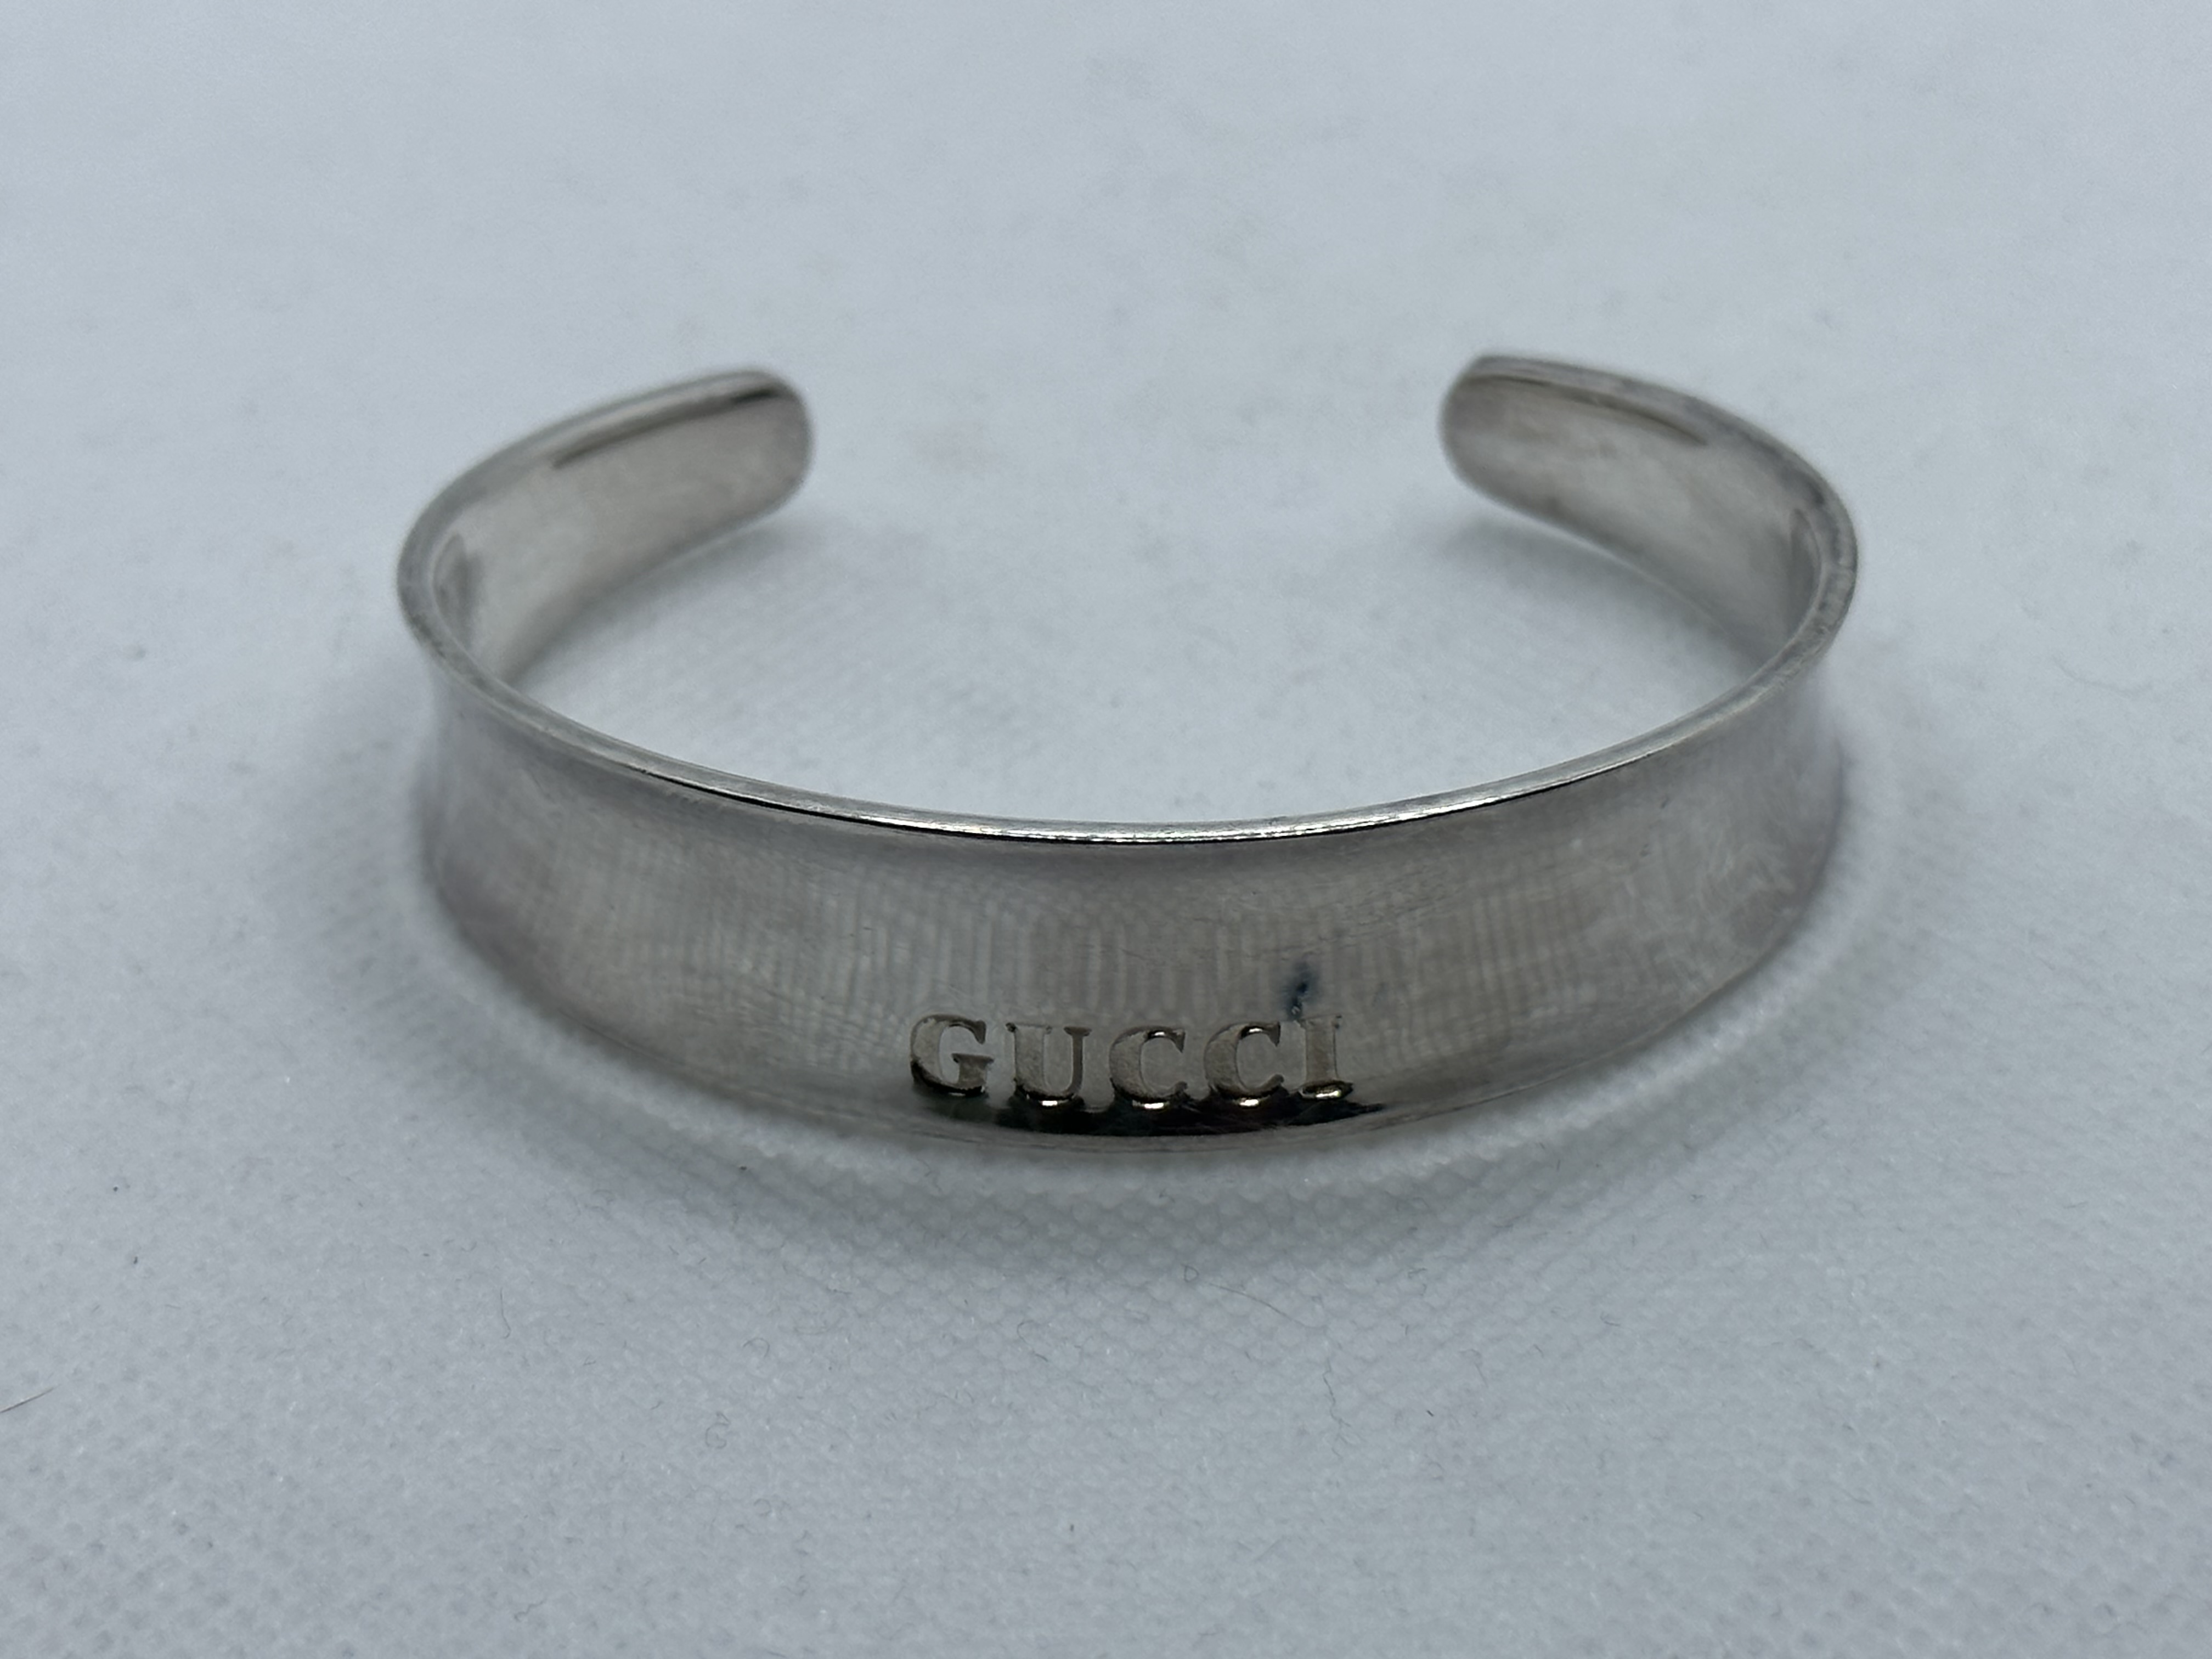 Gucci 925 Silver Made in Italy Cuff Bracelet Bangl - Image 9 of 9